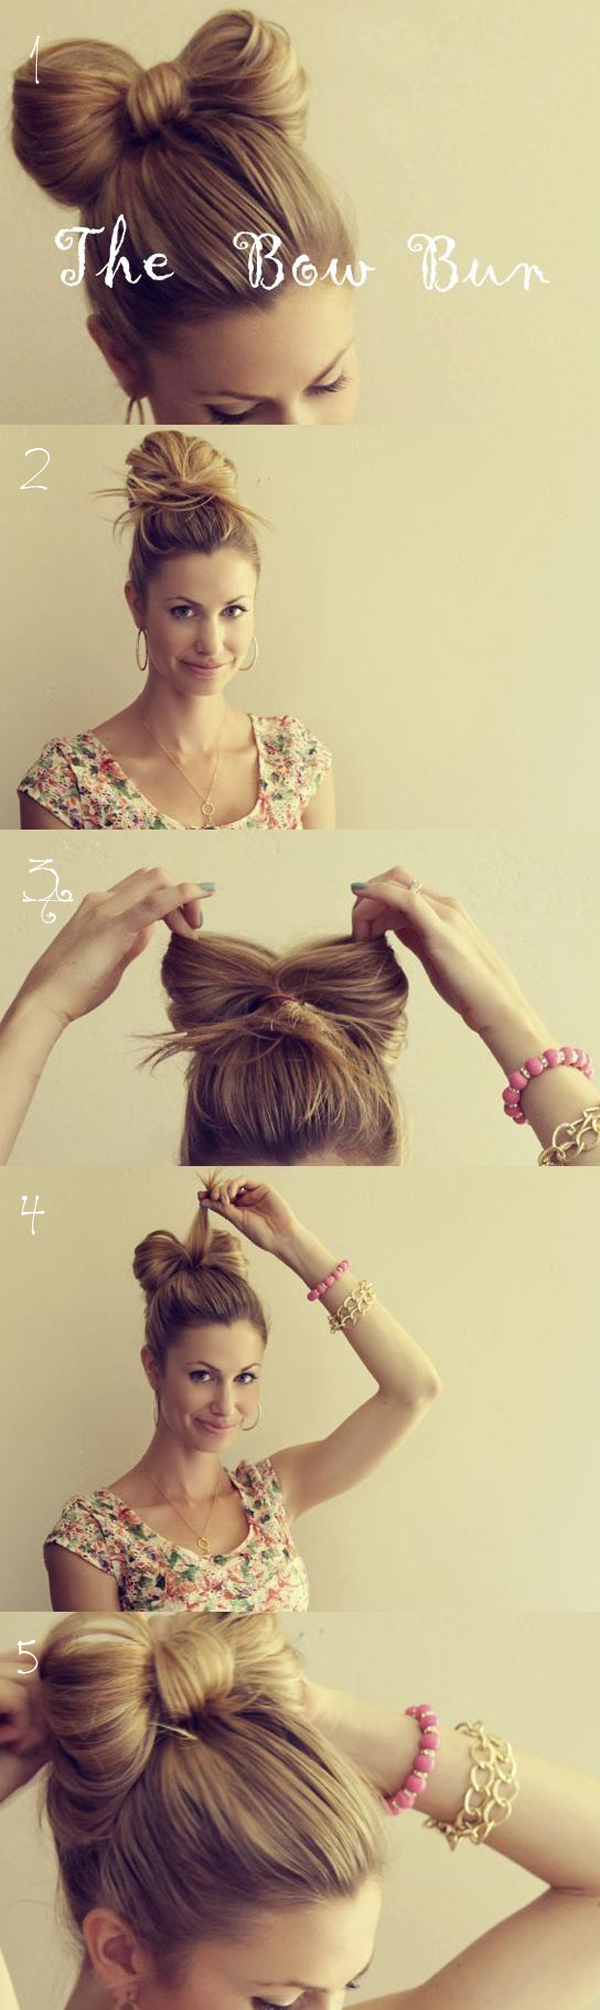 20 Clever And Interesting Tutorials For Your Hairstyle